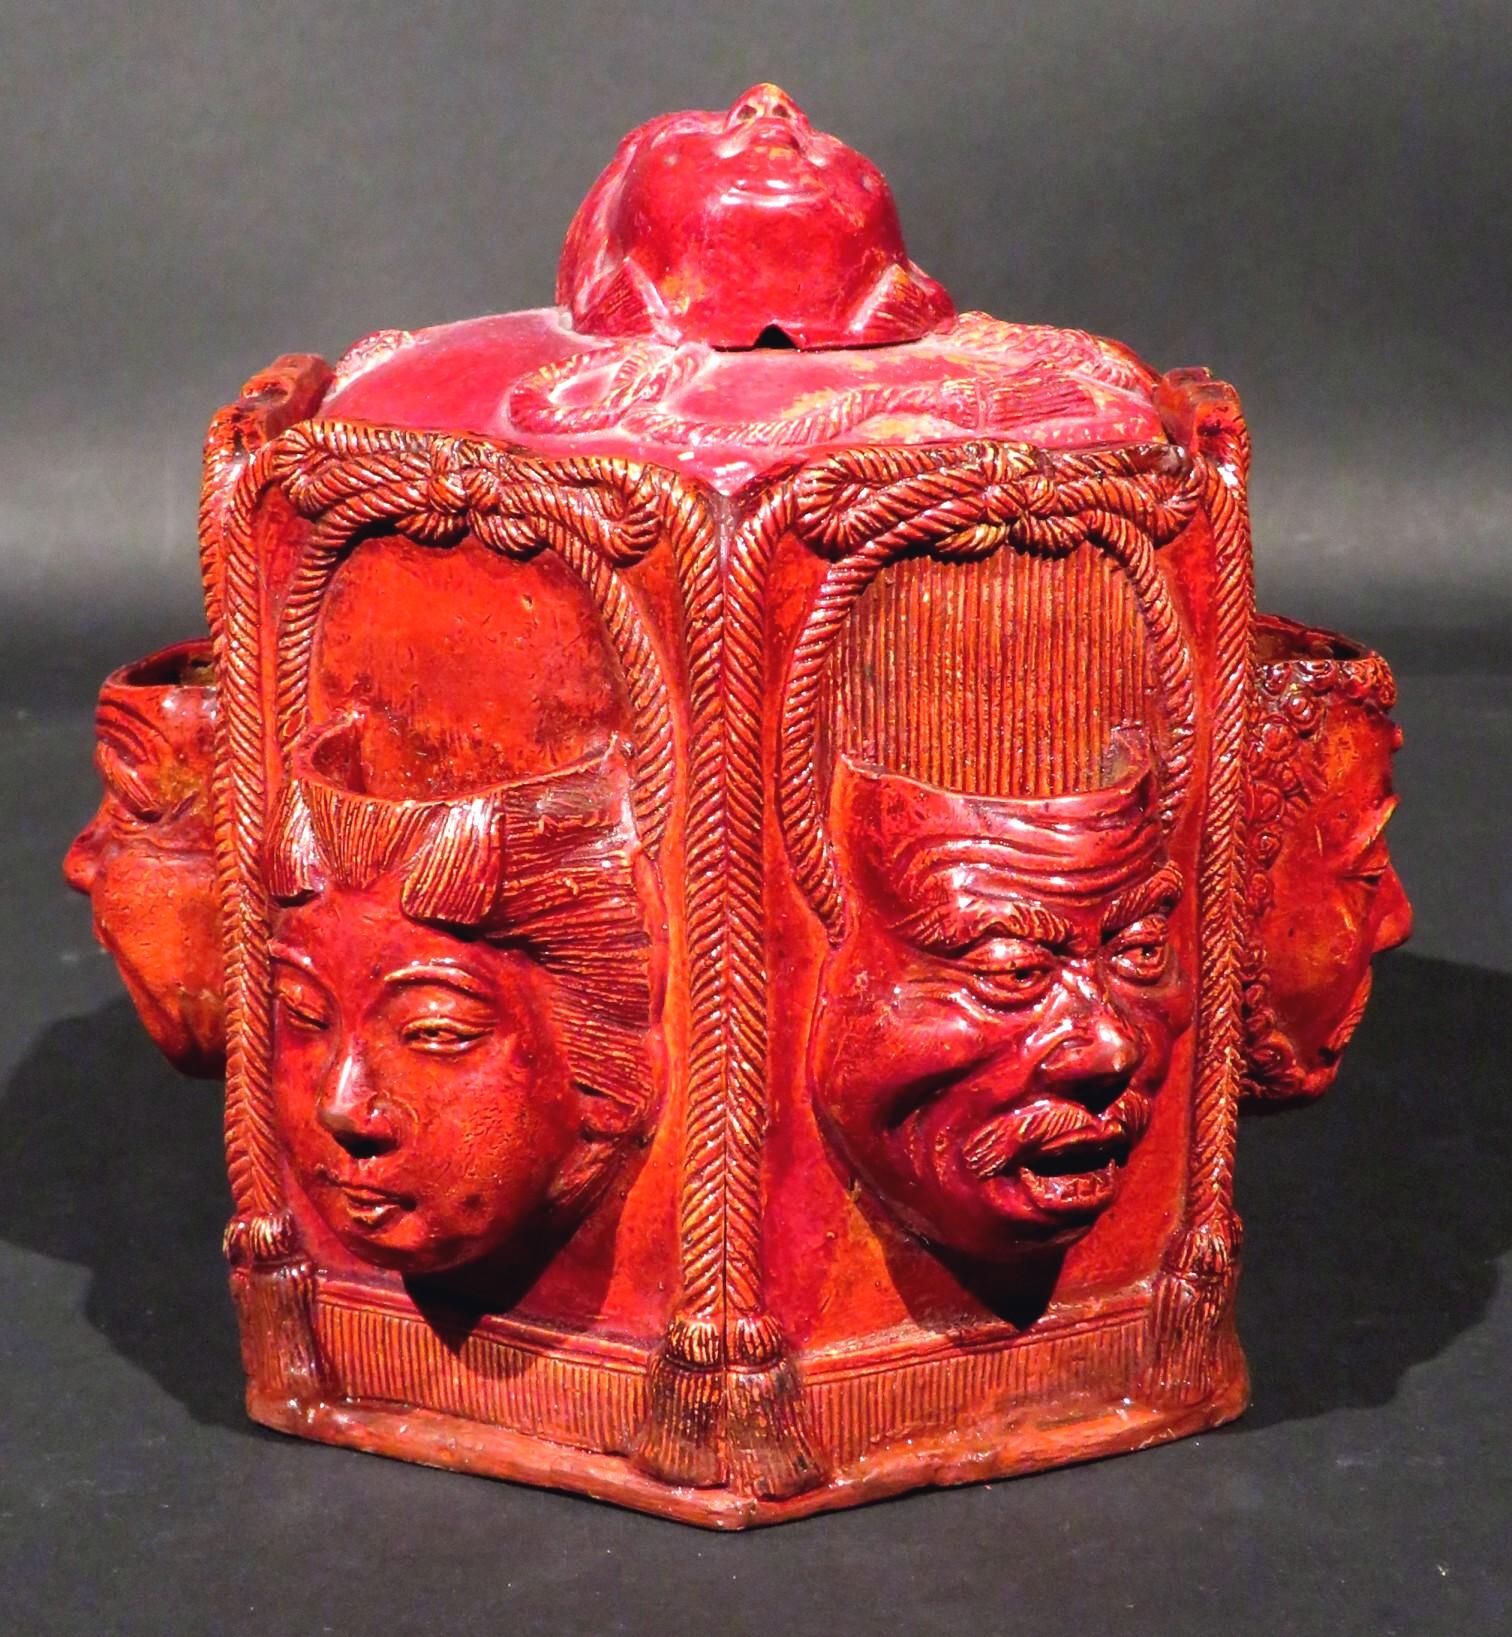 A most unique and highly decorative orientalist inspired tobacco humidor, showing a hexagonal shaped composition body similar to chalk-ware, decorated with match pockets moulded as oriental masks set against tassel framed panels with alternating